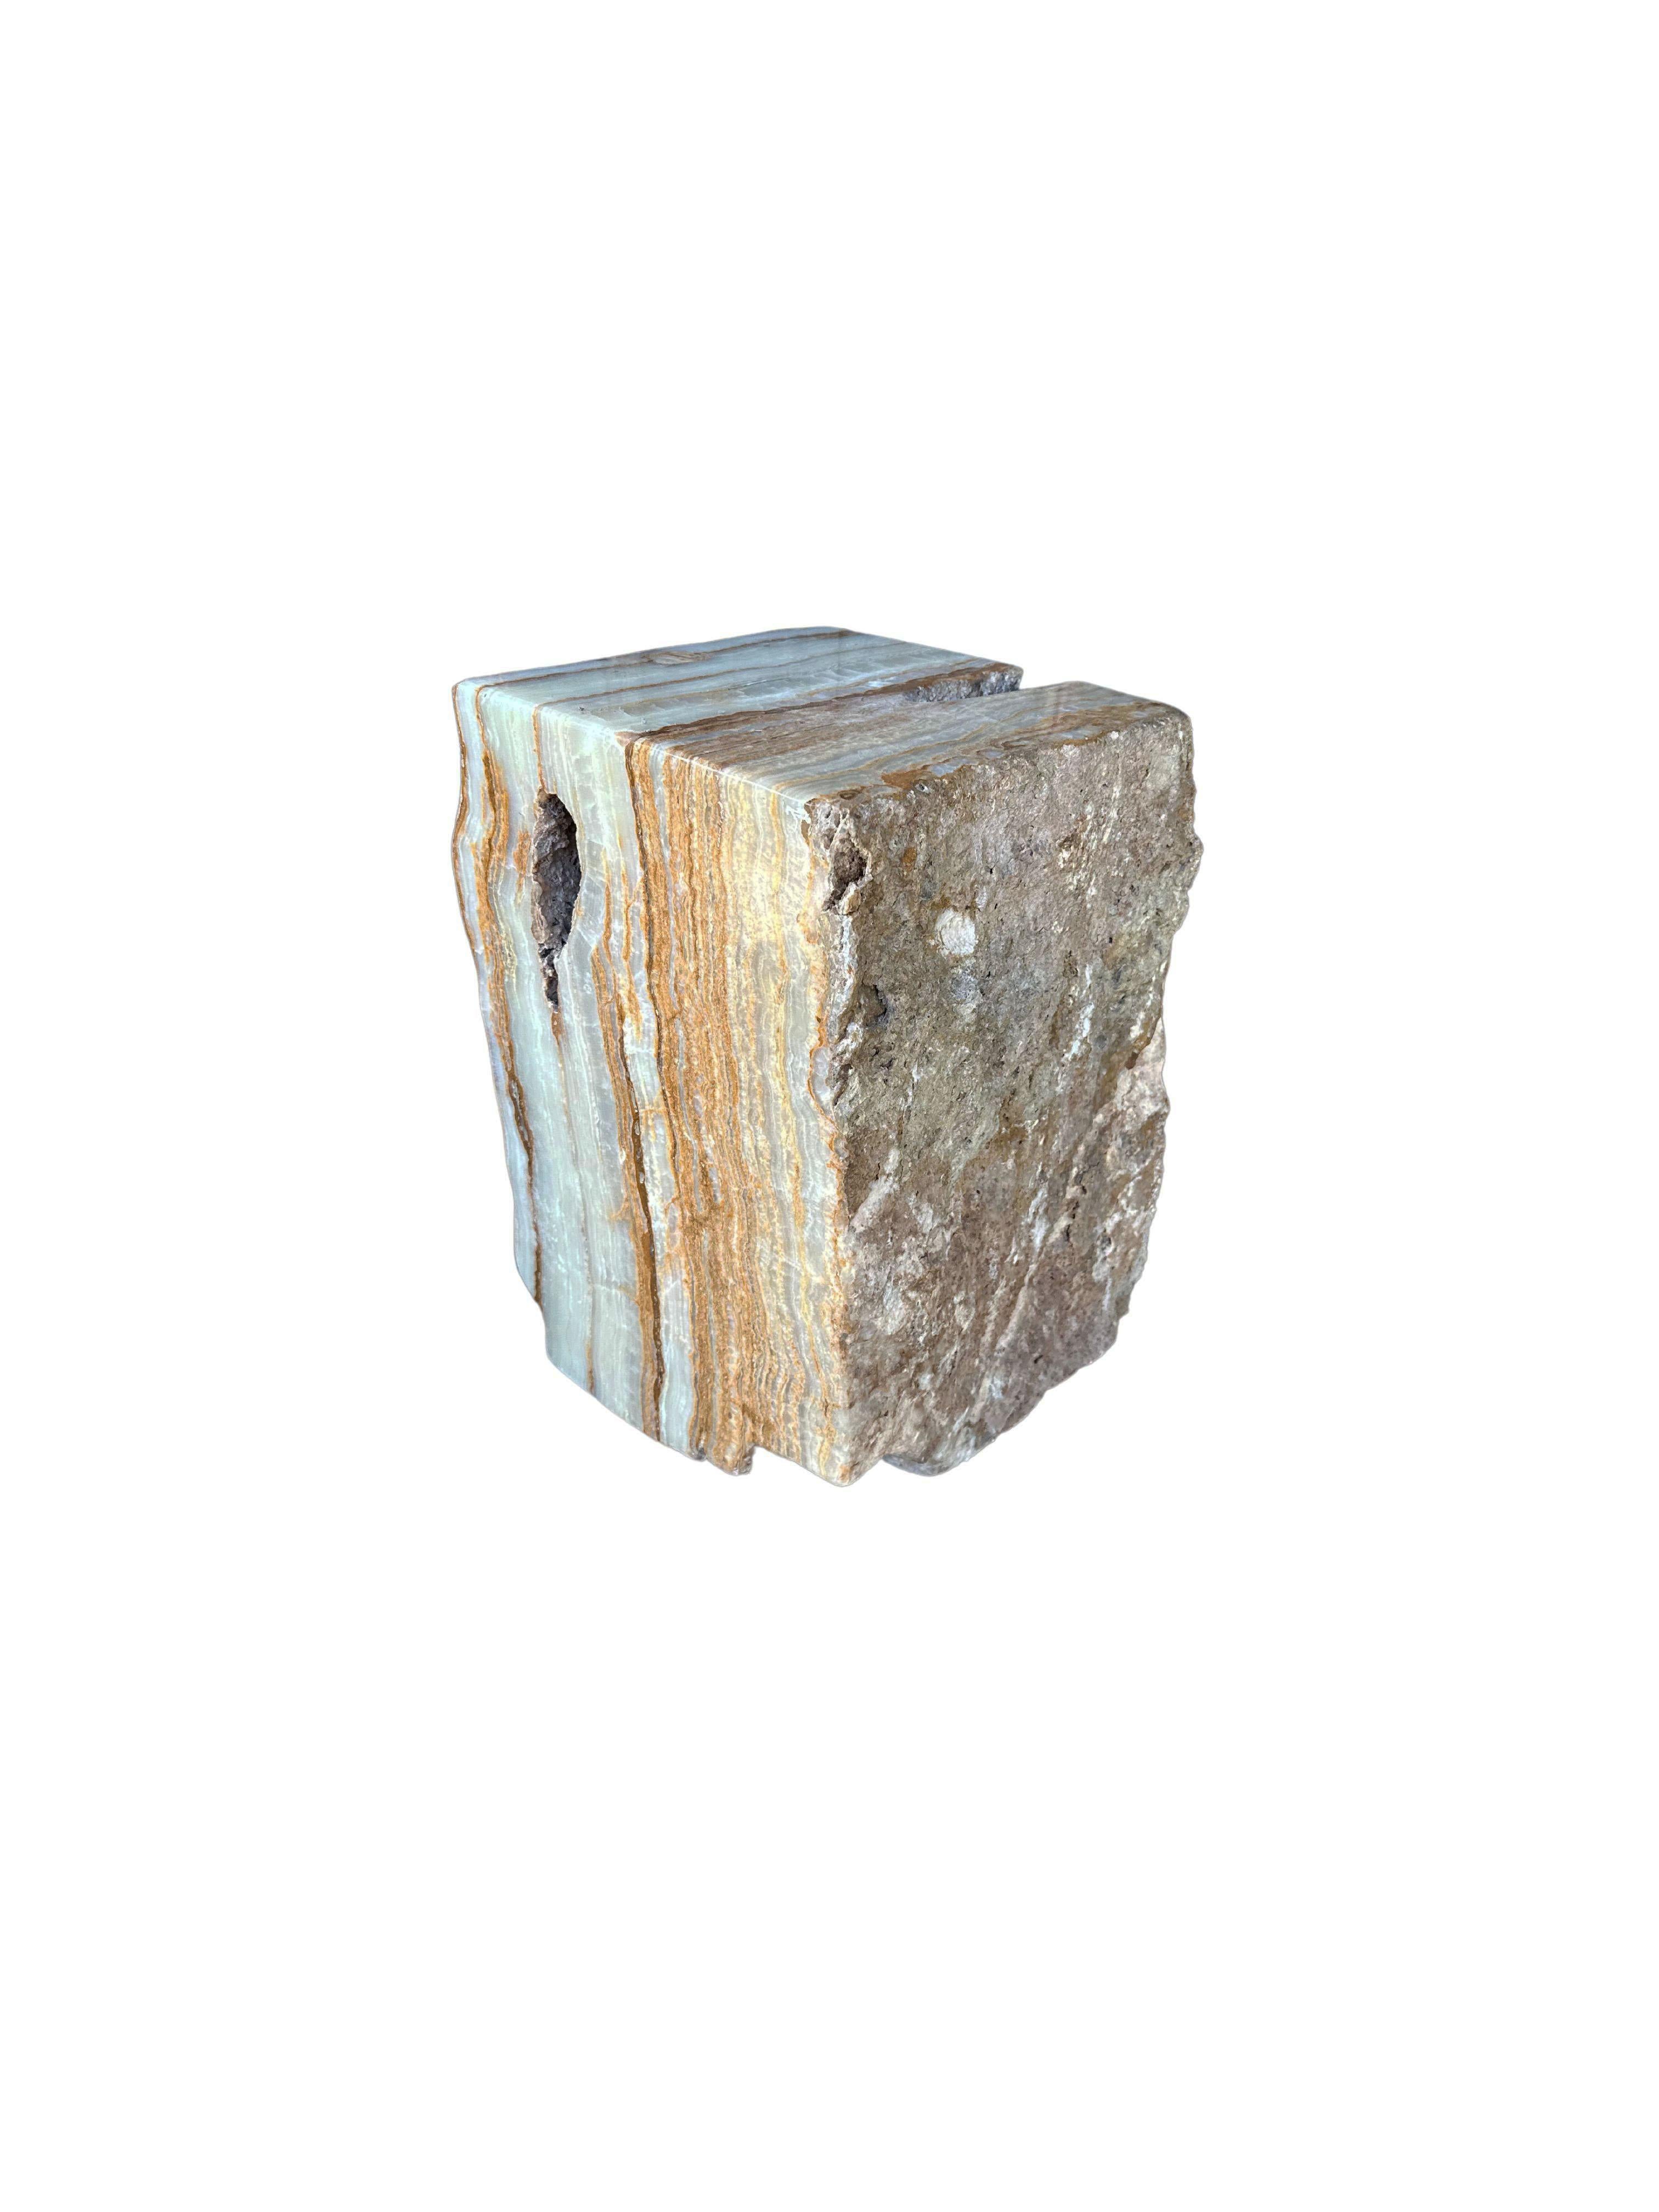 Jupiter Onyx Marble Side Table with Stunning Textures, Modern Organic For Sale 2